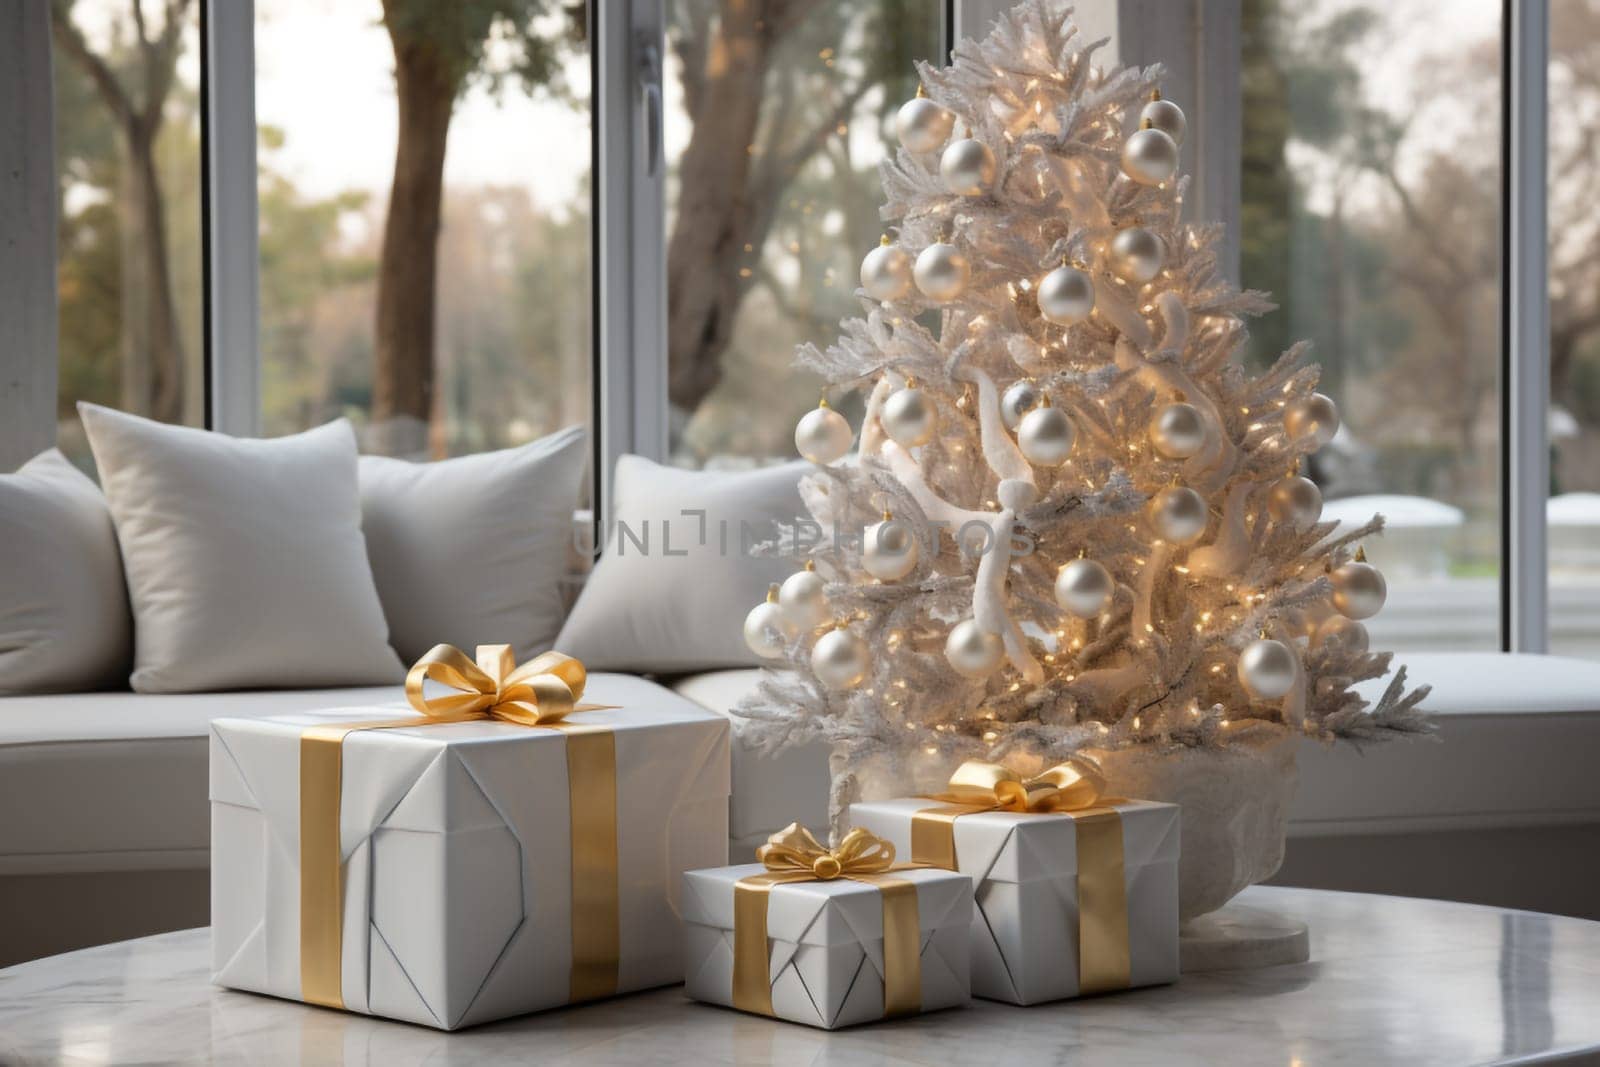 White modern home decorated for Christmas or New Year with a Christmas tree and gifts, a sofa and an illuminated window creating a warm festive atmosphere.